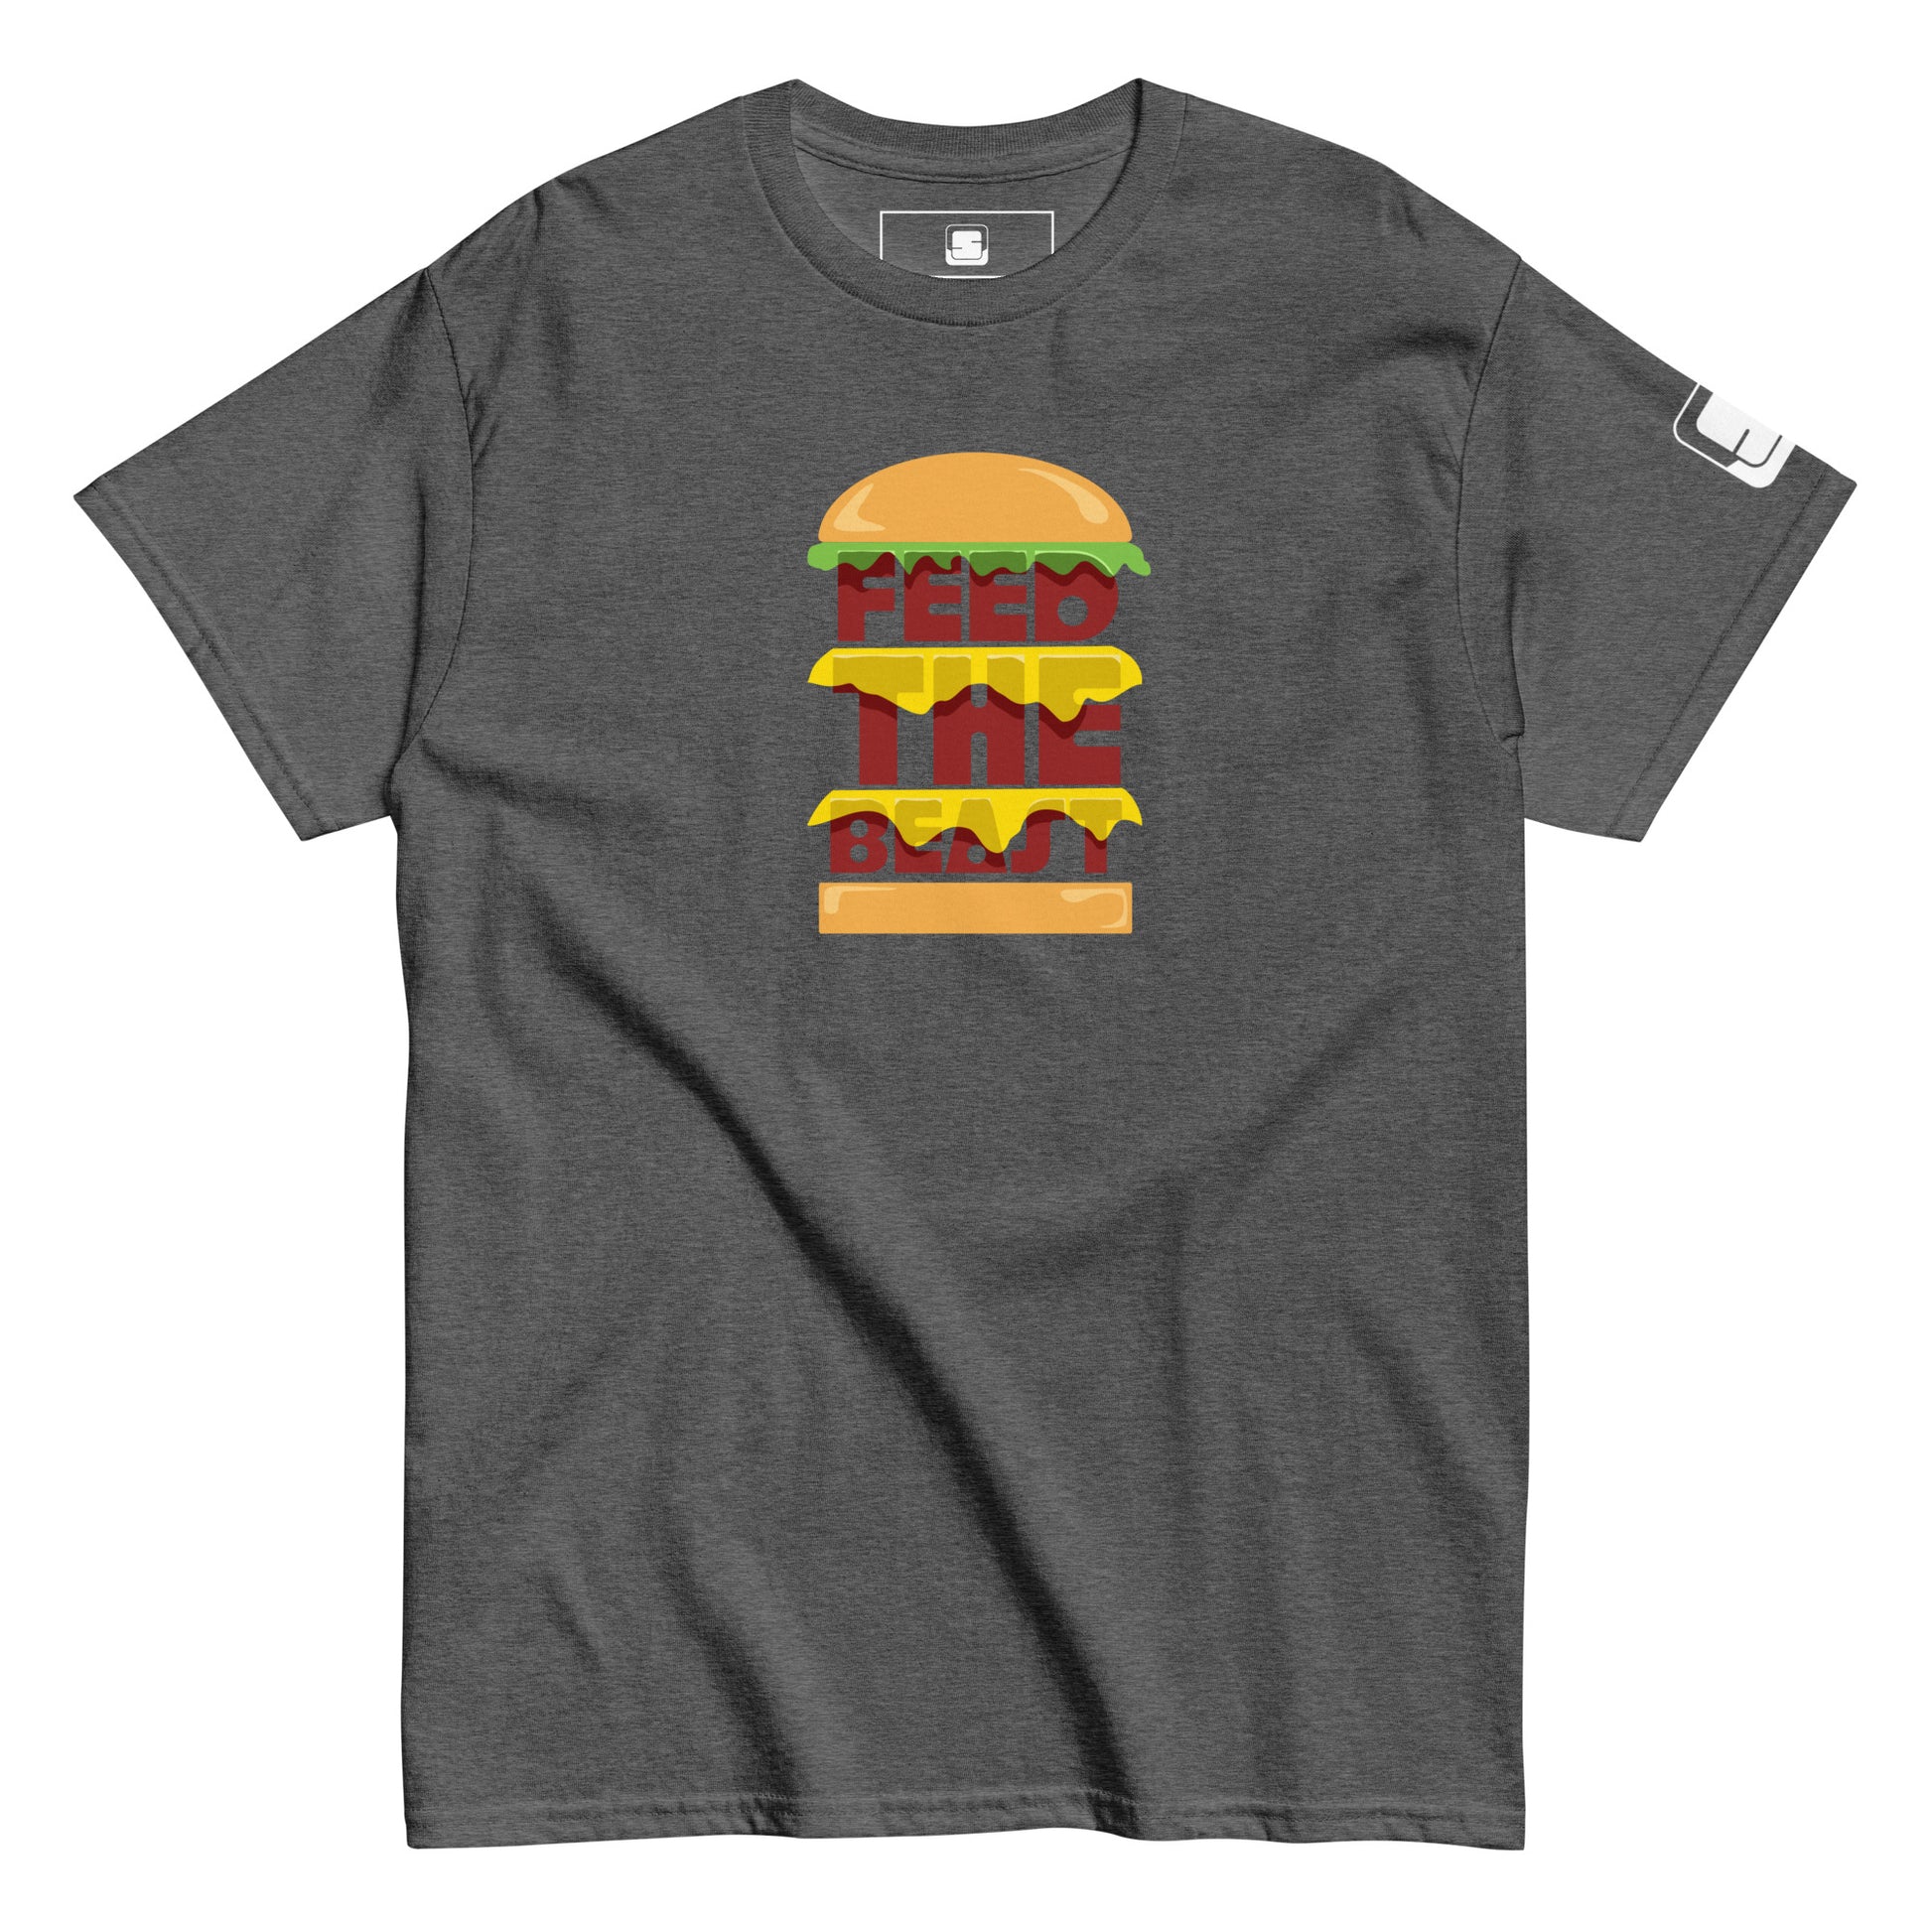 Dark heather t-shirt with 'FEED THE BEAST' in bold, stacked yellow and red lettering embedded in a detailed burger graphic, featuring a small logo patch on the sleeve, presented on a plain white background.